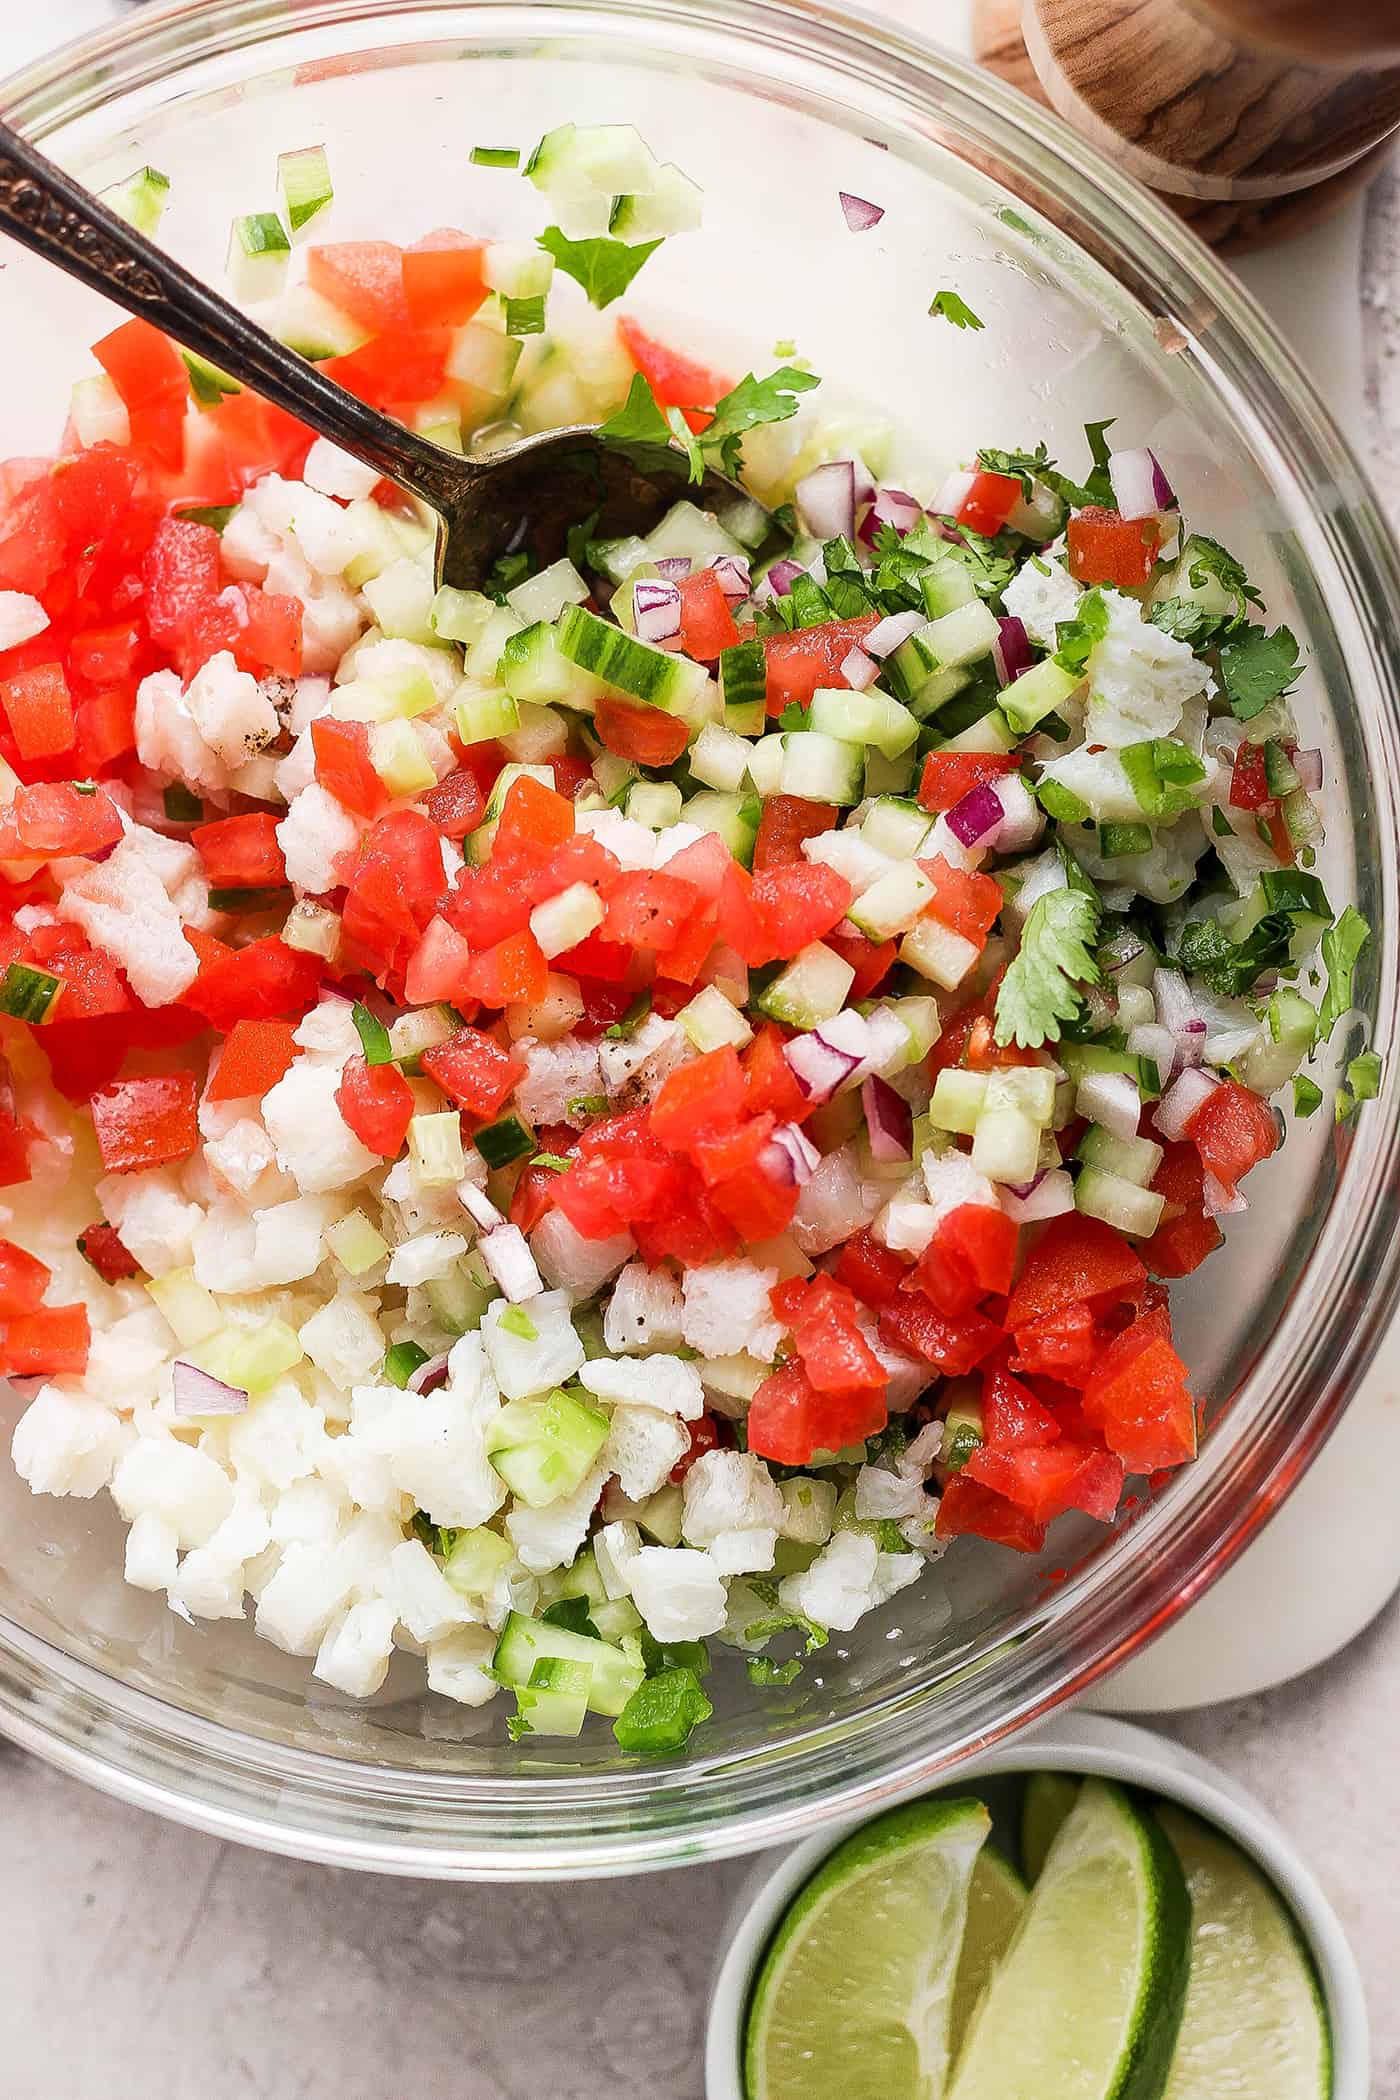 The classic ceviche ingredients are mixed together in a bowl.